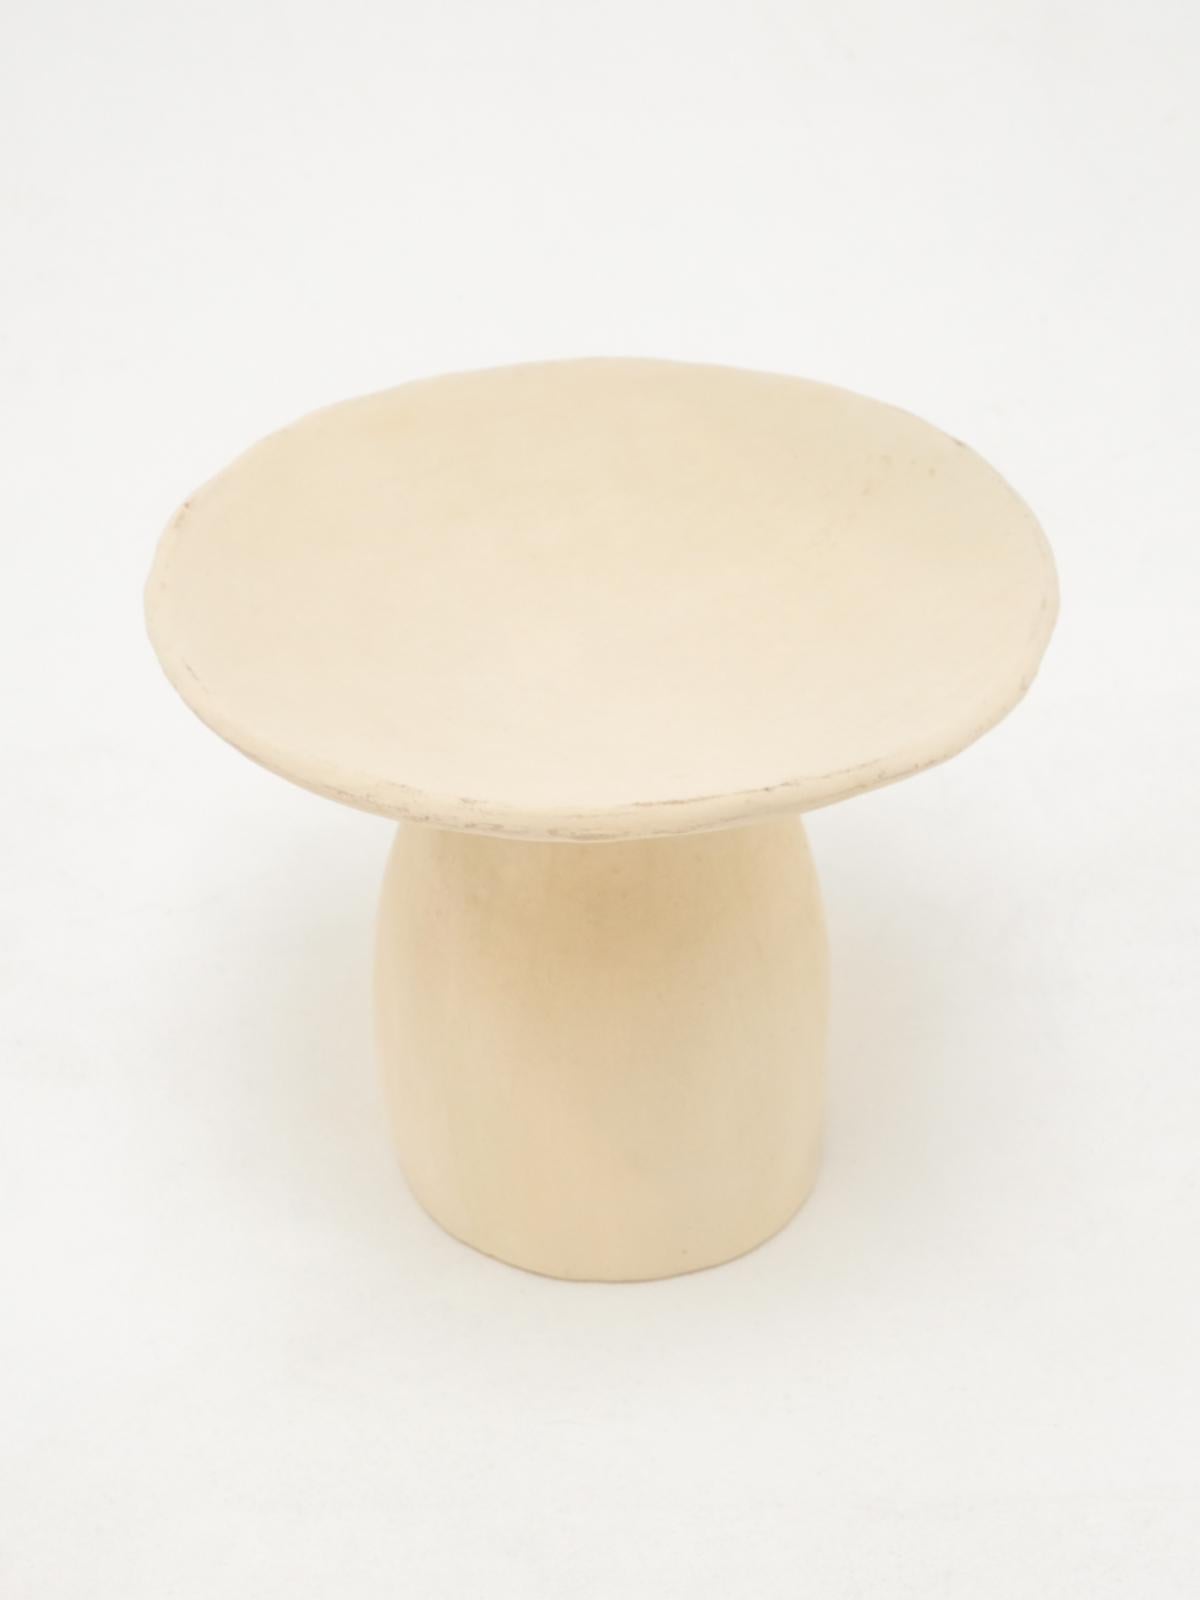 Moroccan White Side Tables Made of local Clay, natural pigments, Handcrafted